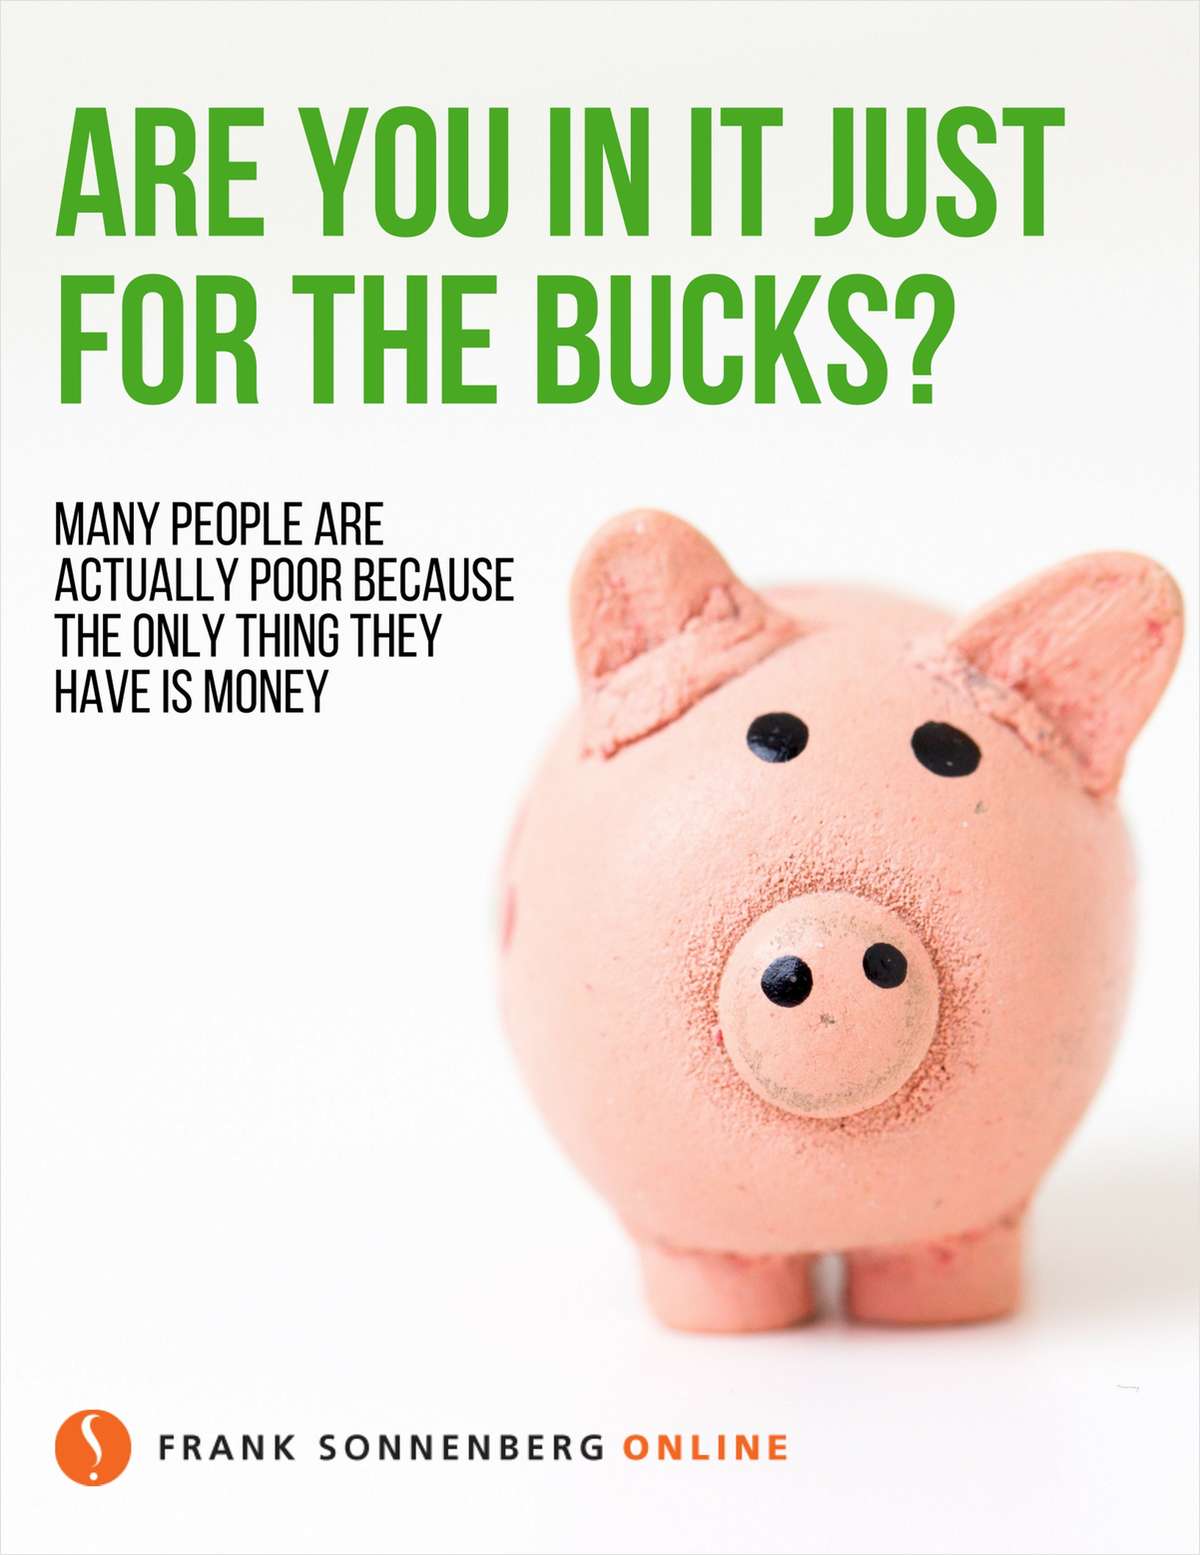 Are You in It Just for the Bucks?